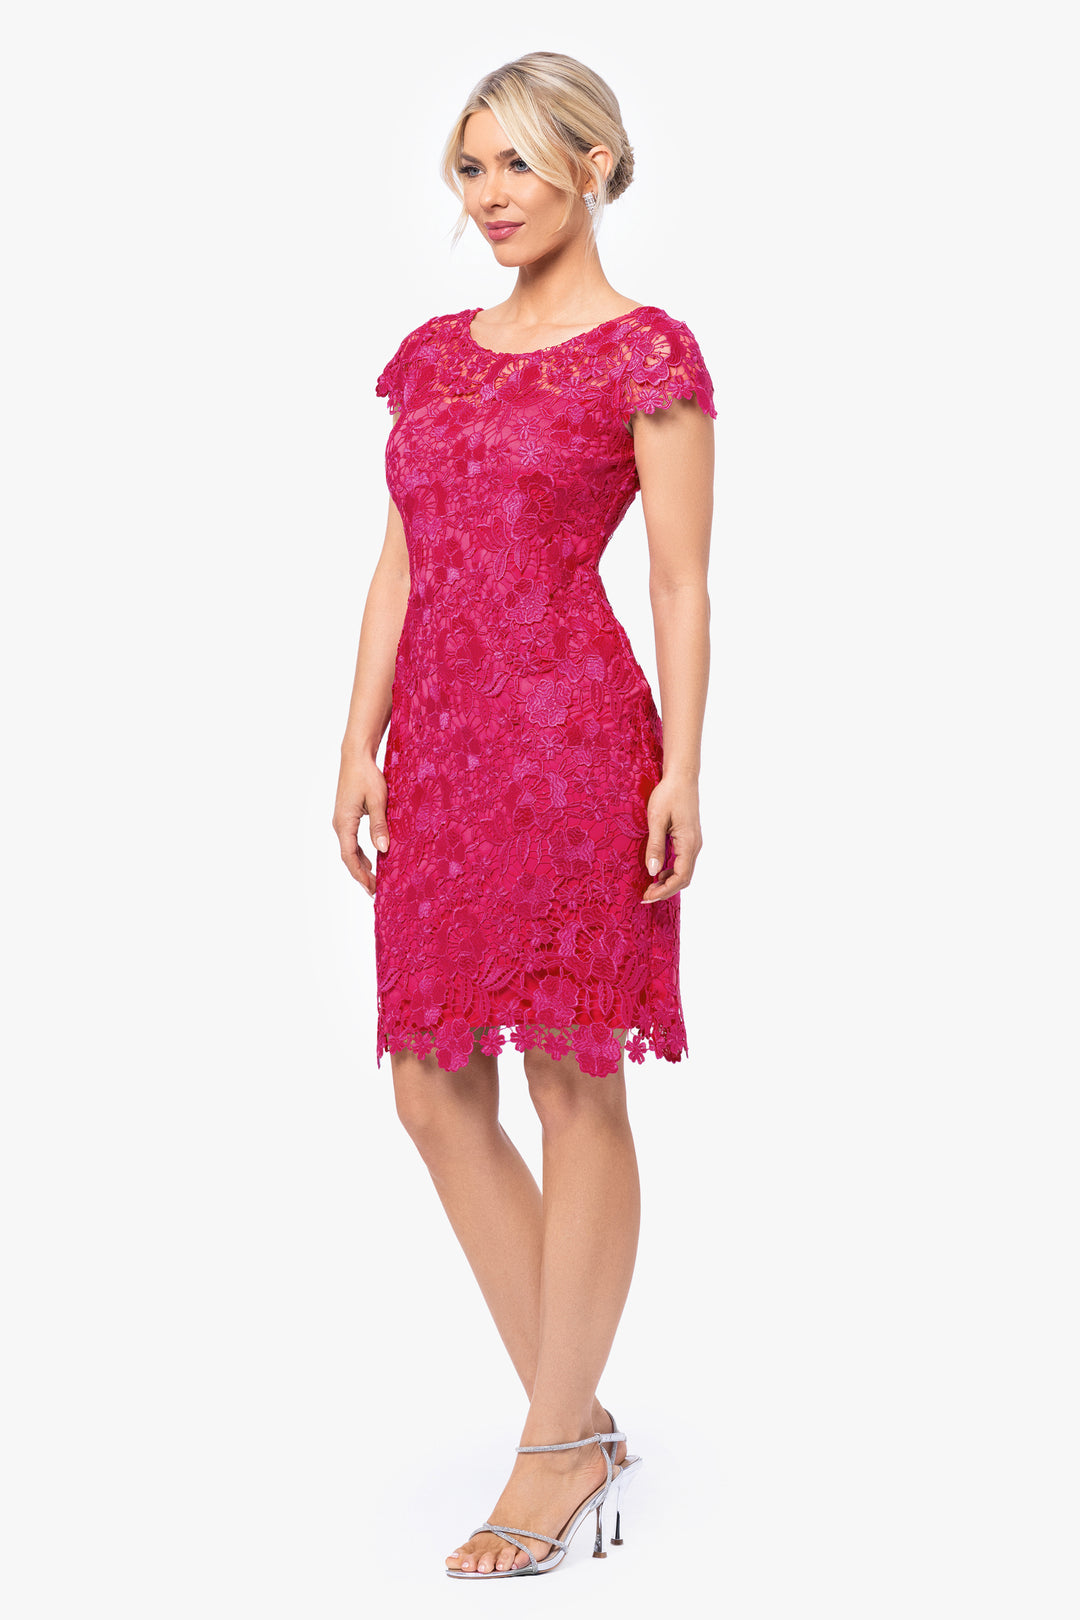 "Audrey" Short Sleeve Embroidered Flower Lace Dress